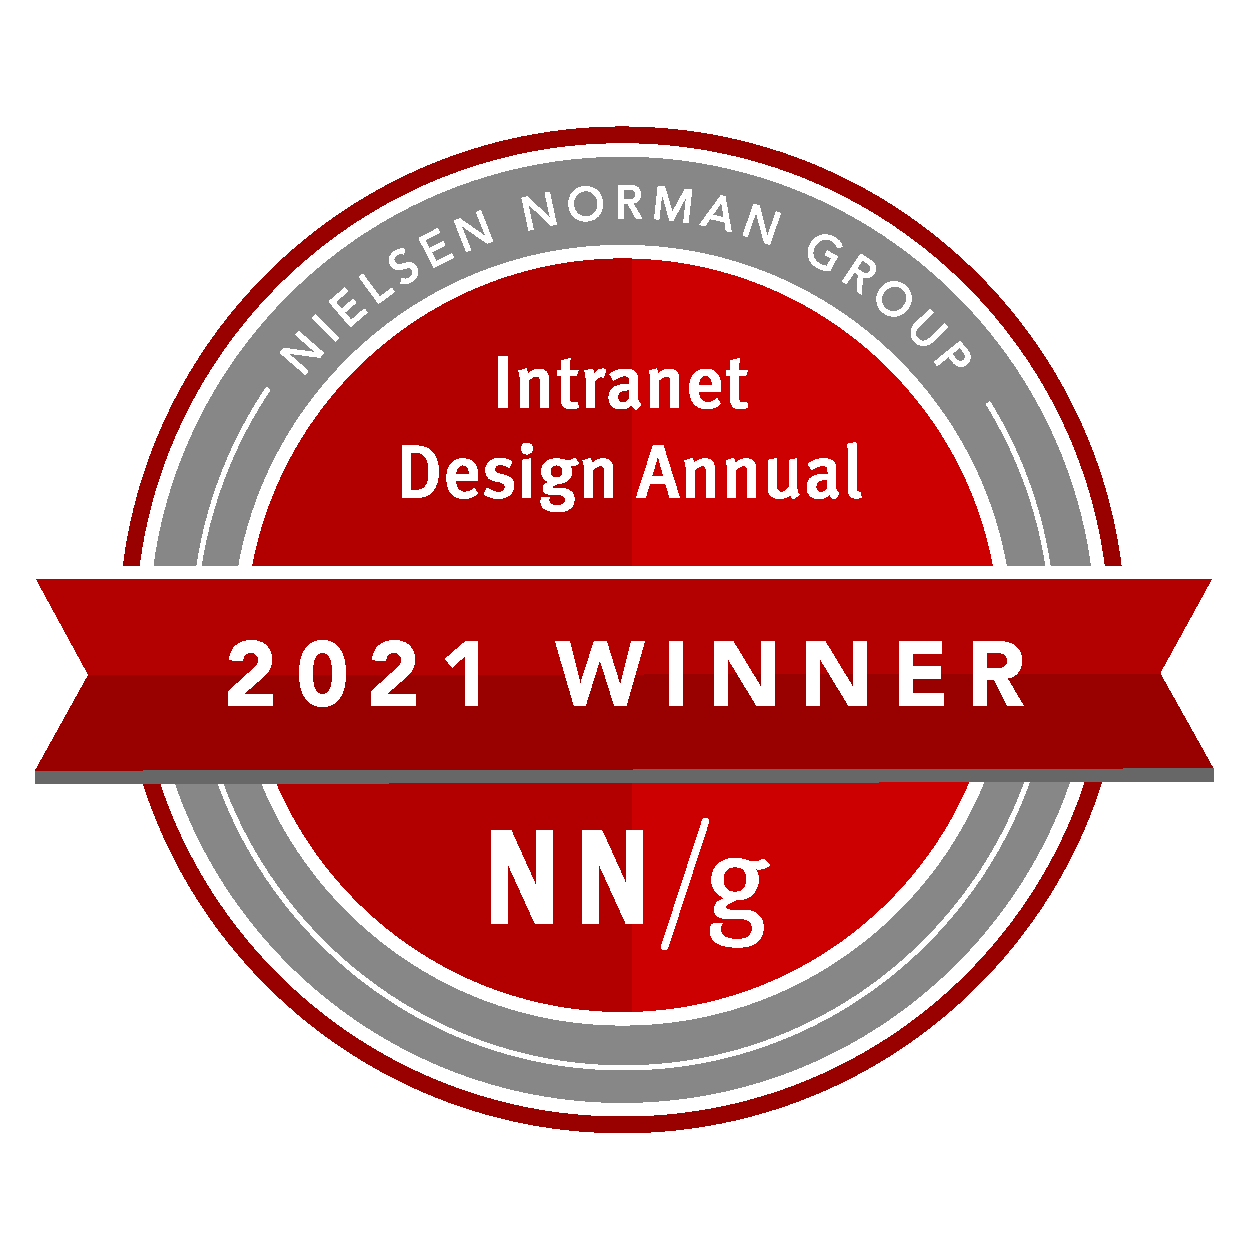 Red round badge with text: Nielsen Norman Group Intranet Design Annual 2021 Winner 